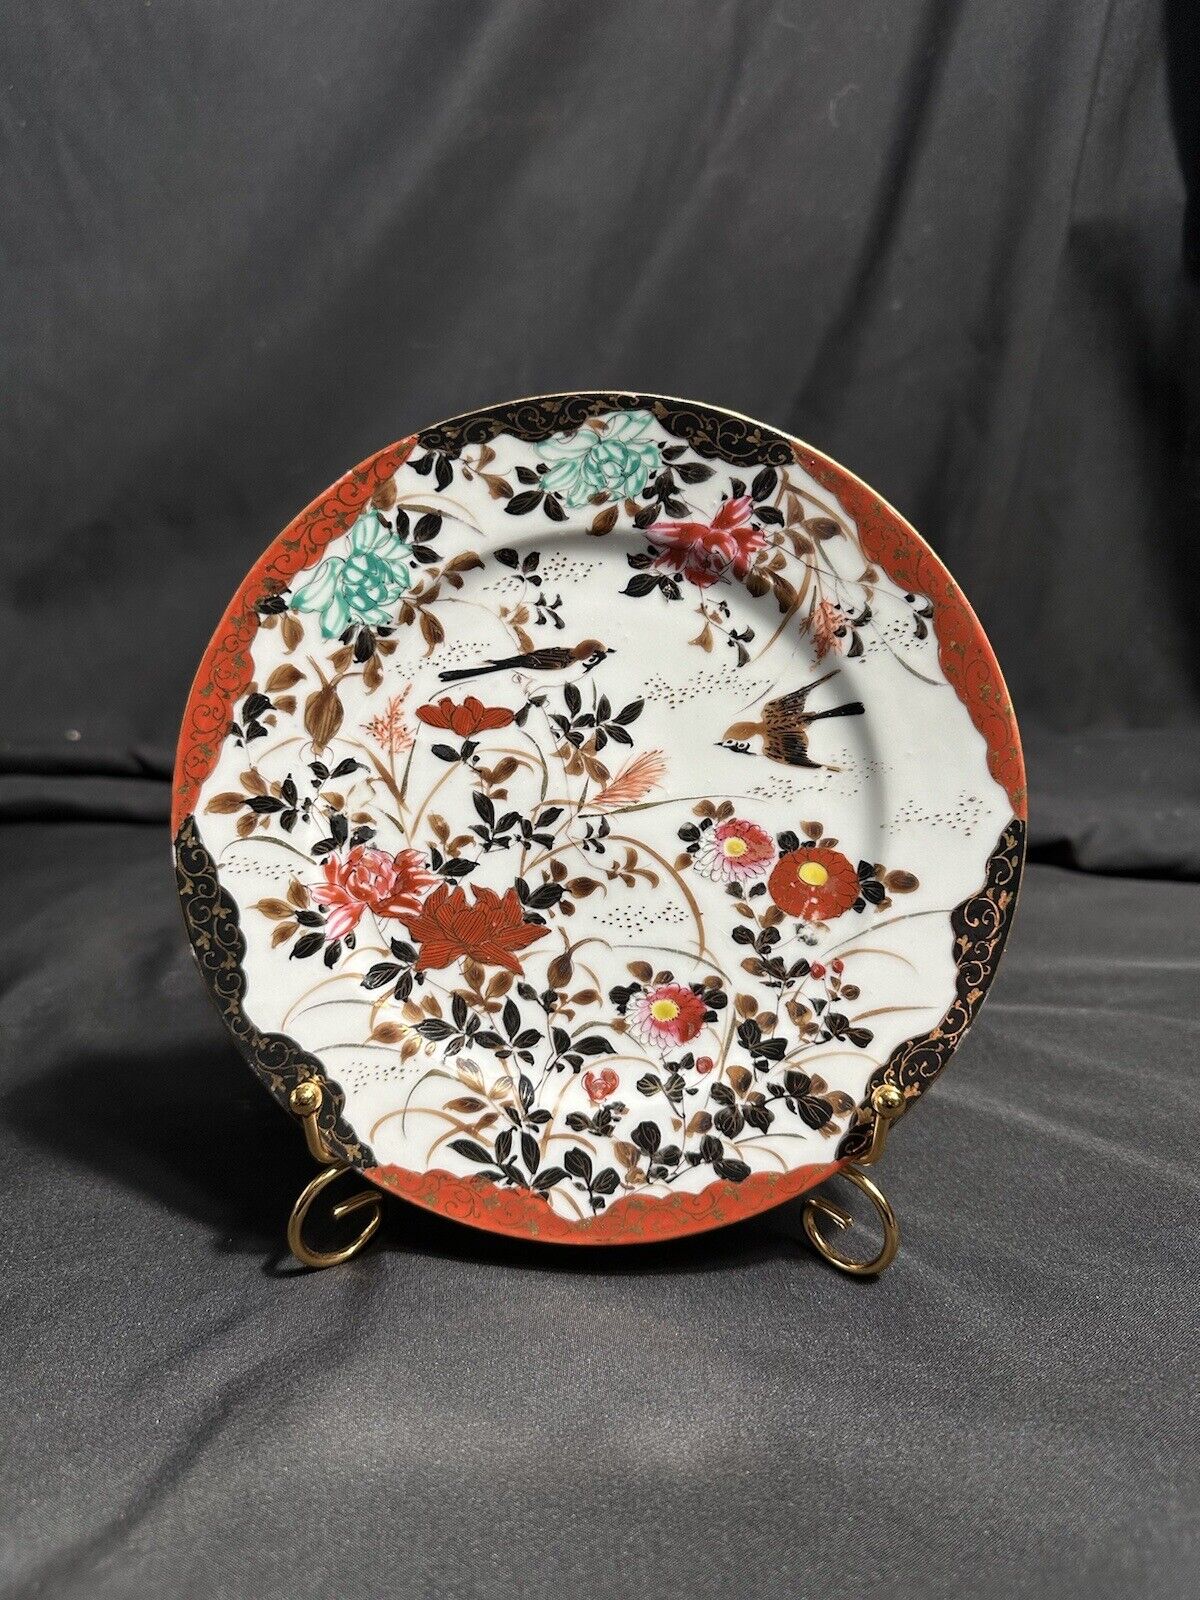 Antique chinese porcelain collectible 7” Decorative plate